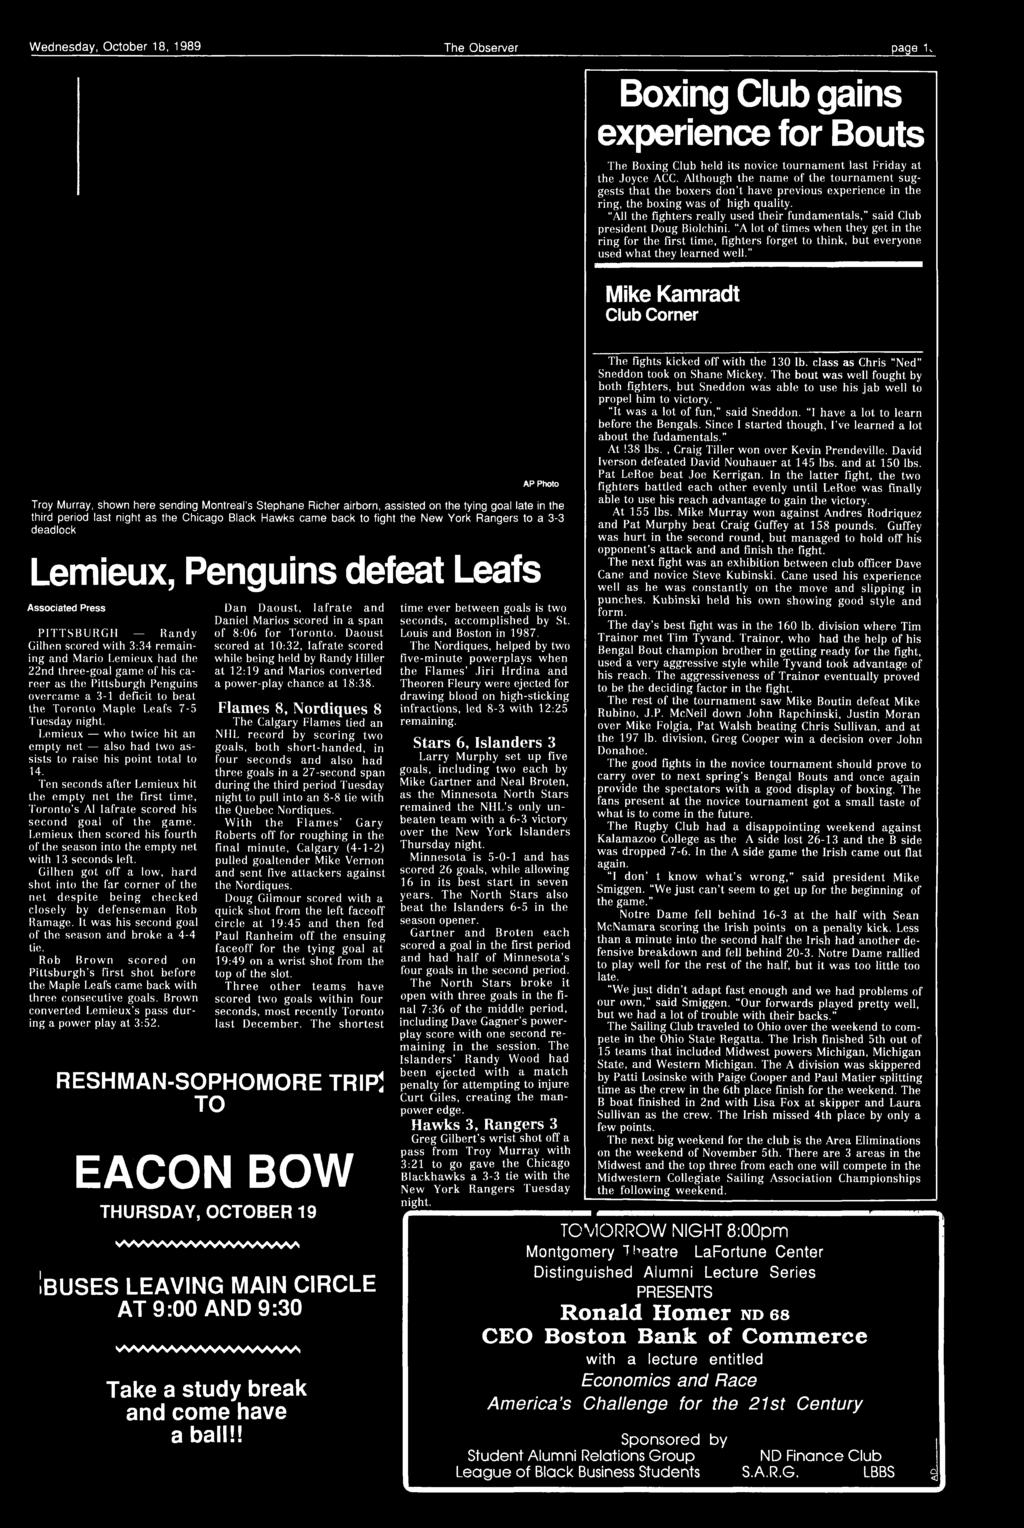 the New York Rangers to a 3-3 deadlock Lemeux, Penguns defeat Leafs PTTSBURGH Randy Glhen scored wth 3:34 remanng and Maro Lemeux had the 22nd three-goal game of hs career as the Pttsburgh Penguns